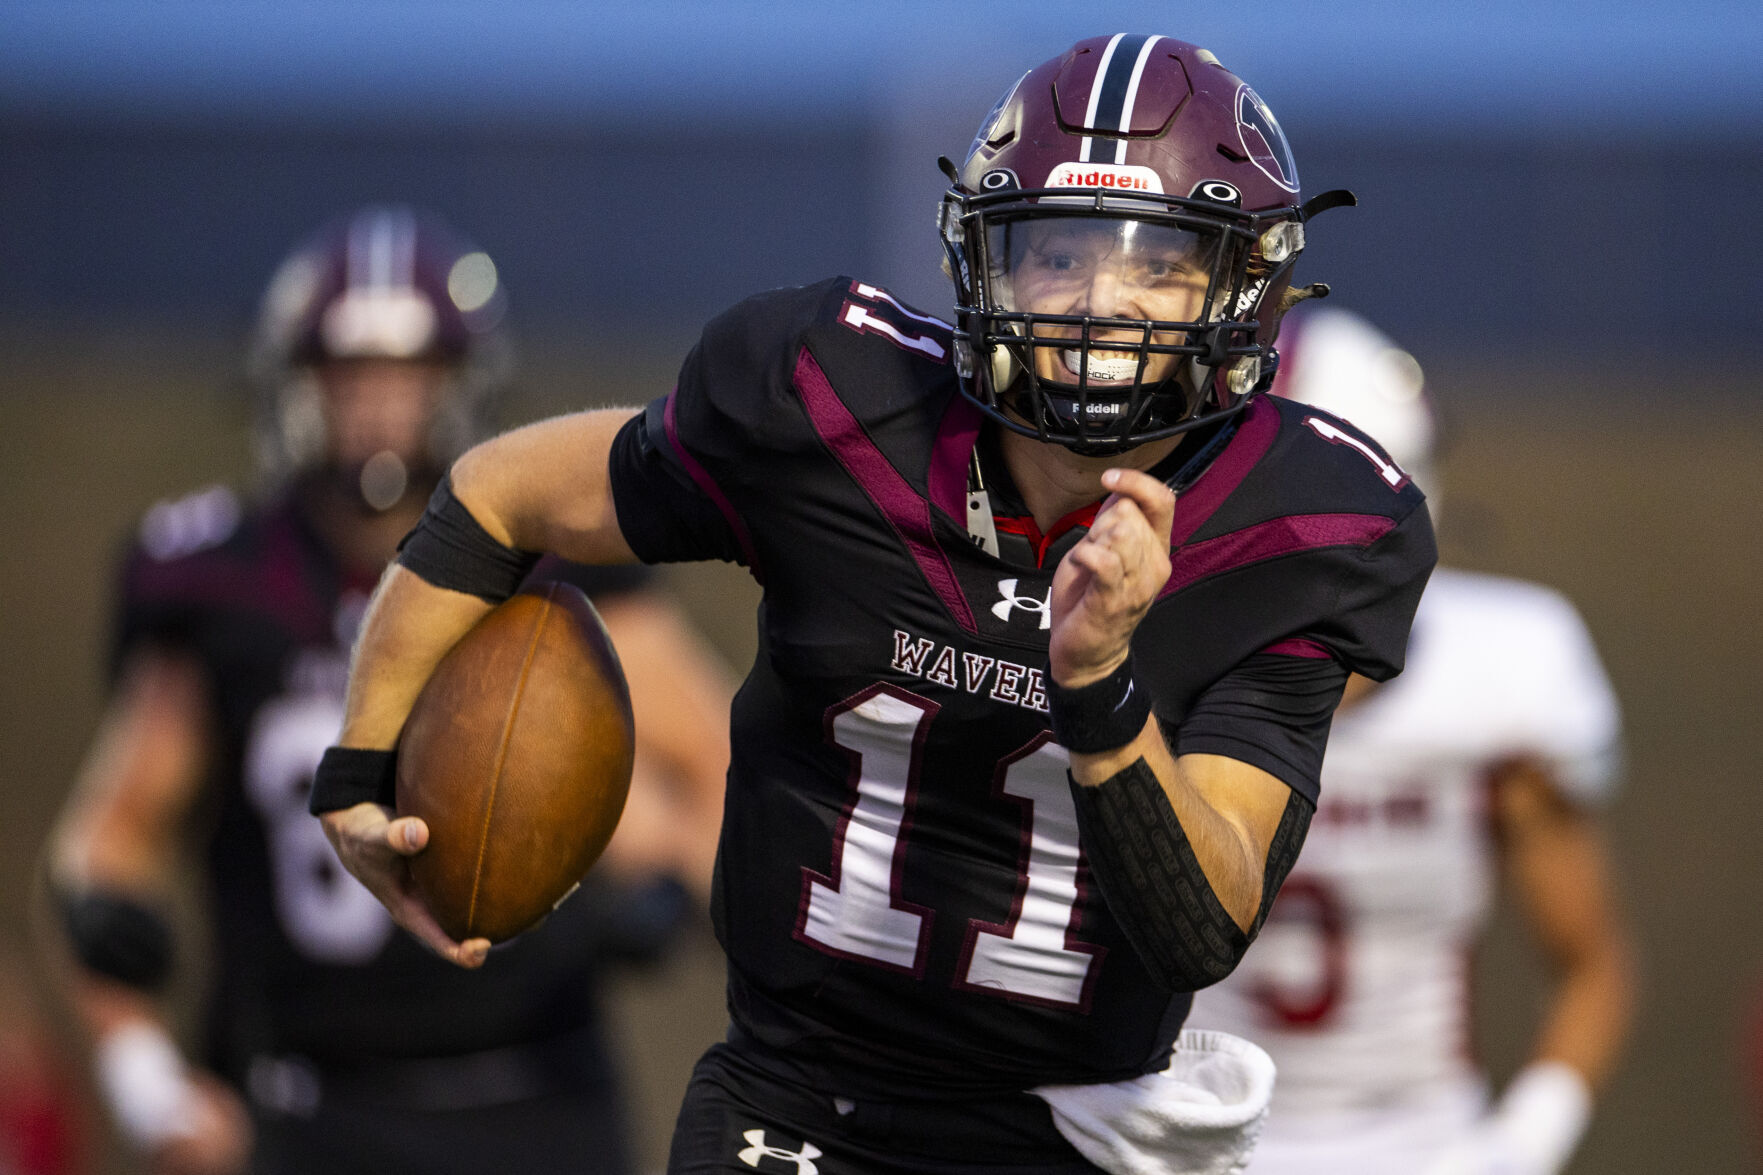 Class B Football Playoffs Heating Up with Exciting Matchups and Key Players to Watch